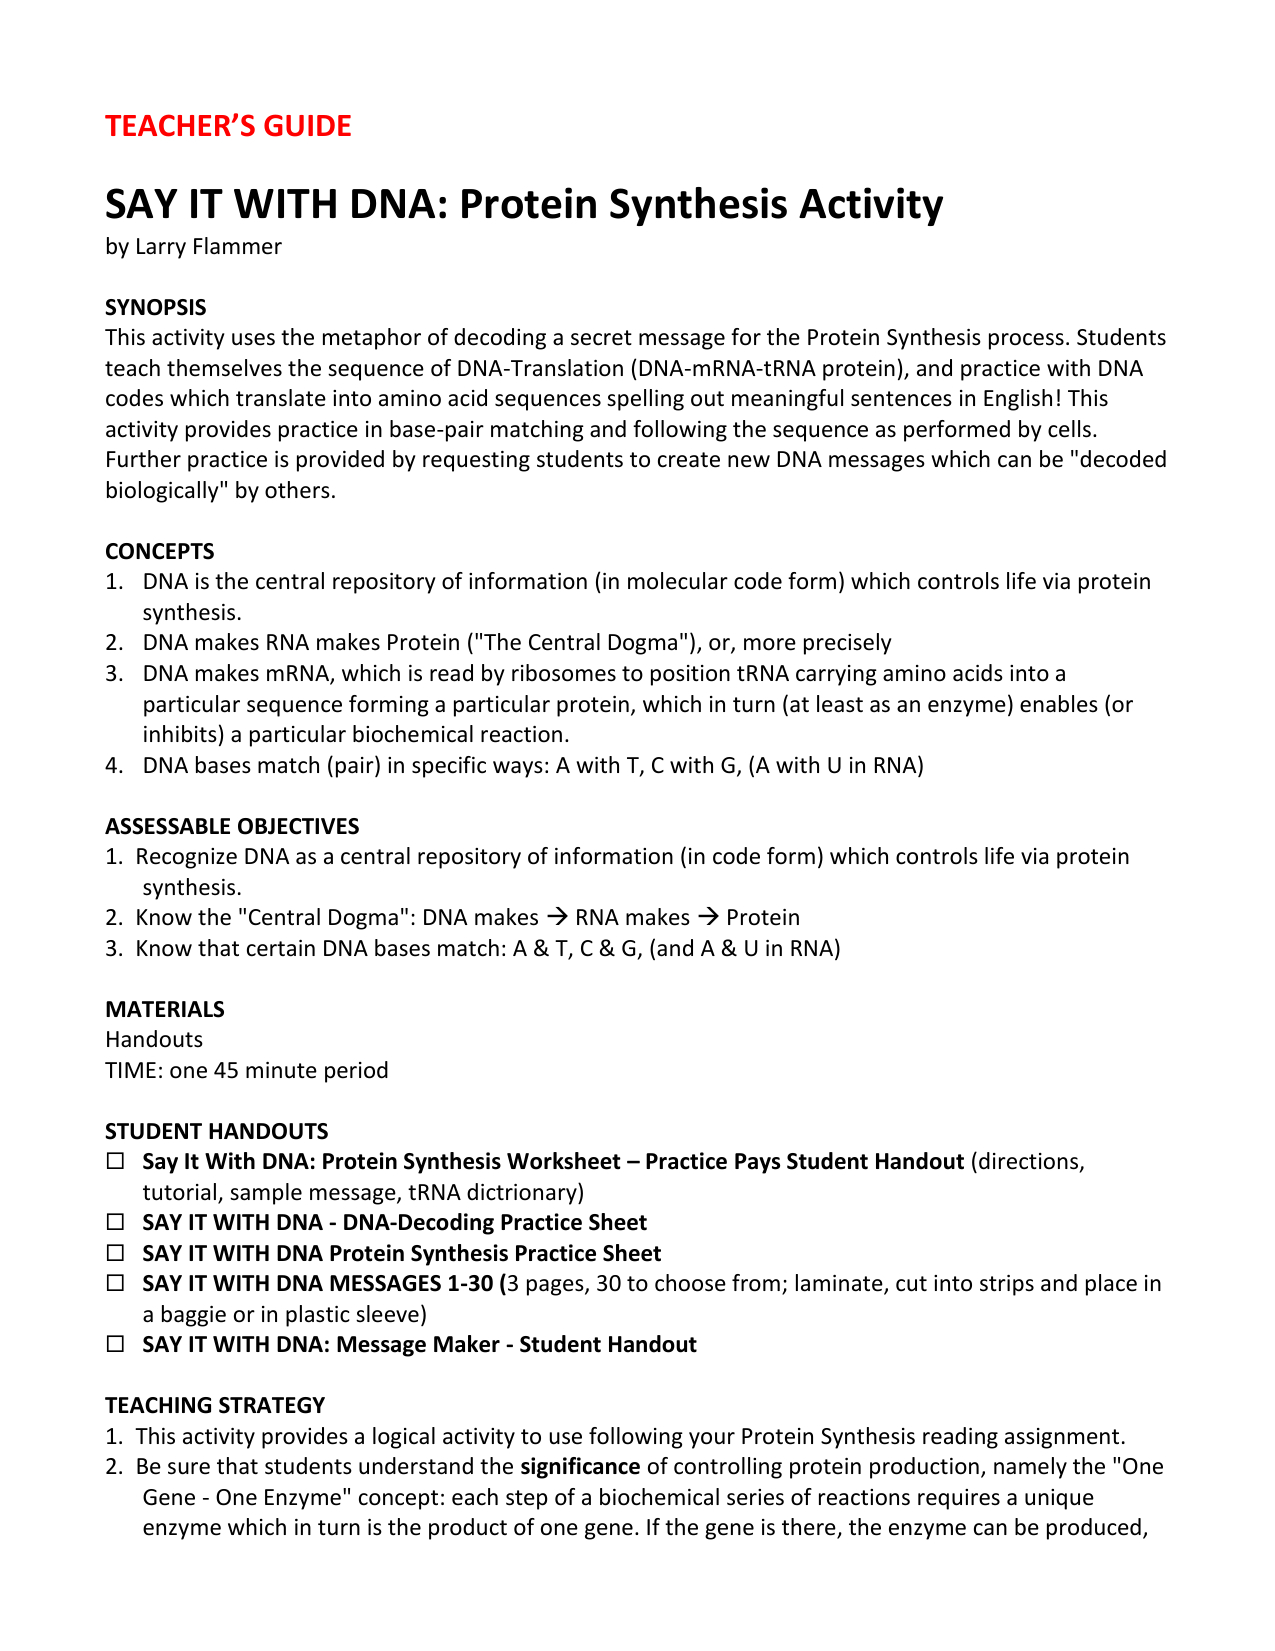 Say It With Dna Protein Synthesis Worksheet Practice For Protein Synthesis Practice Worksheet